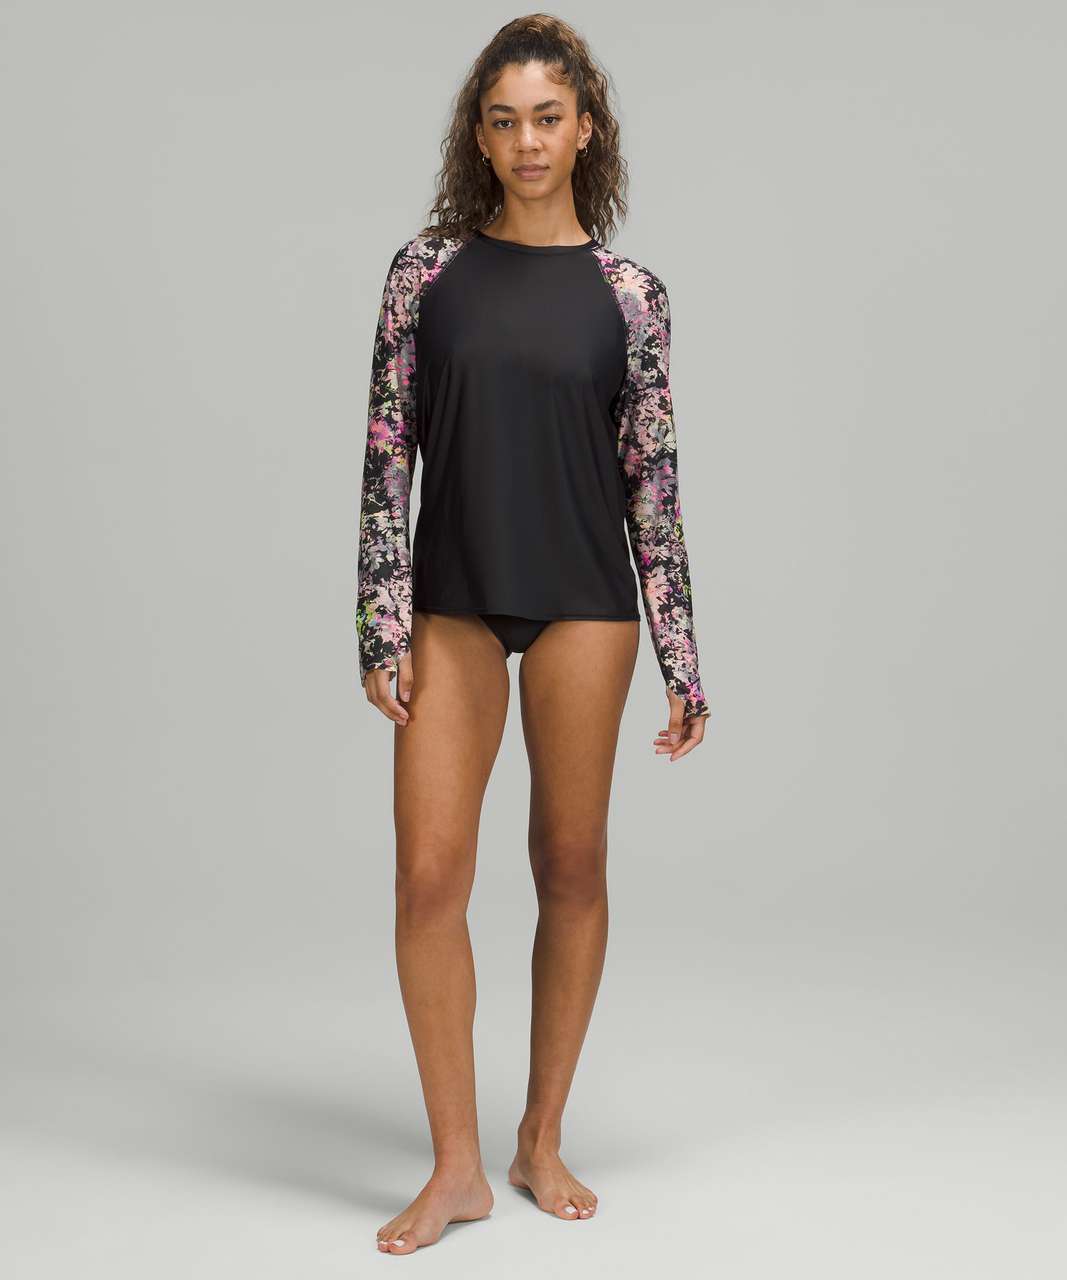 Lululemon Waterside Relaxed UV Protection Long Sleeve - Black / Stencil Blossom Pink Multi